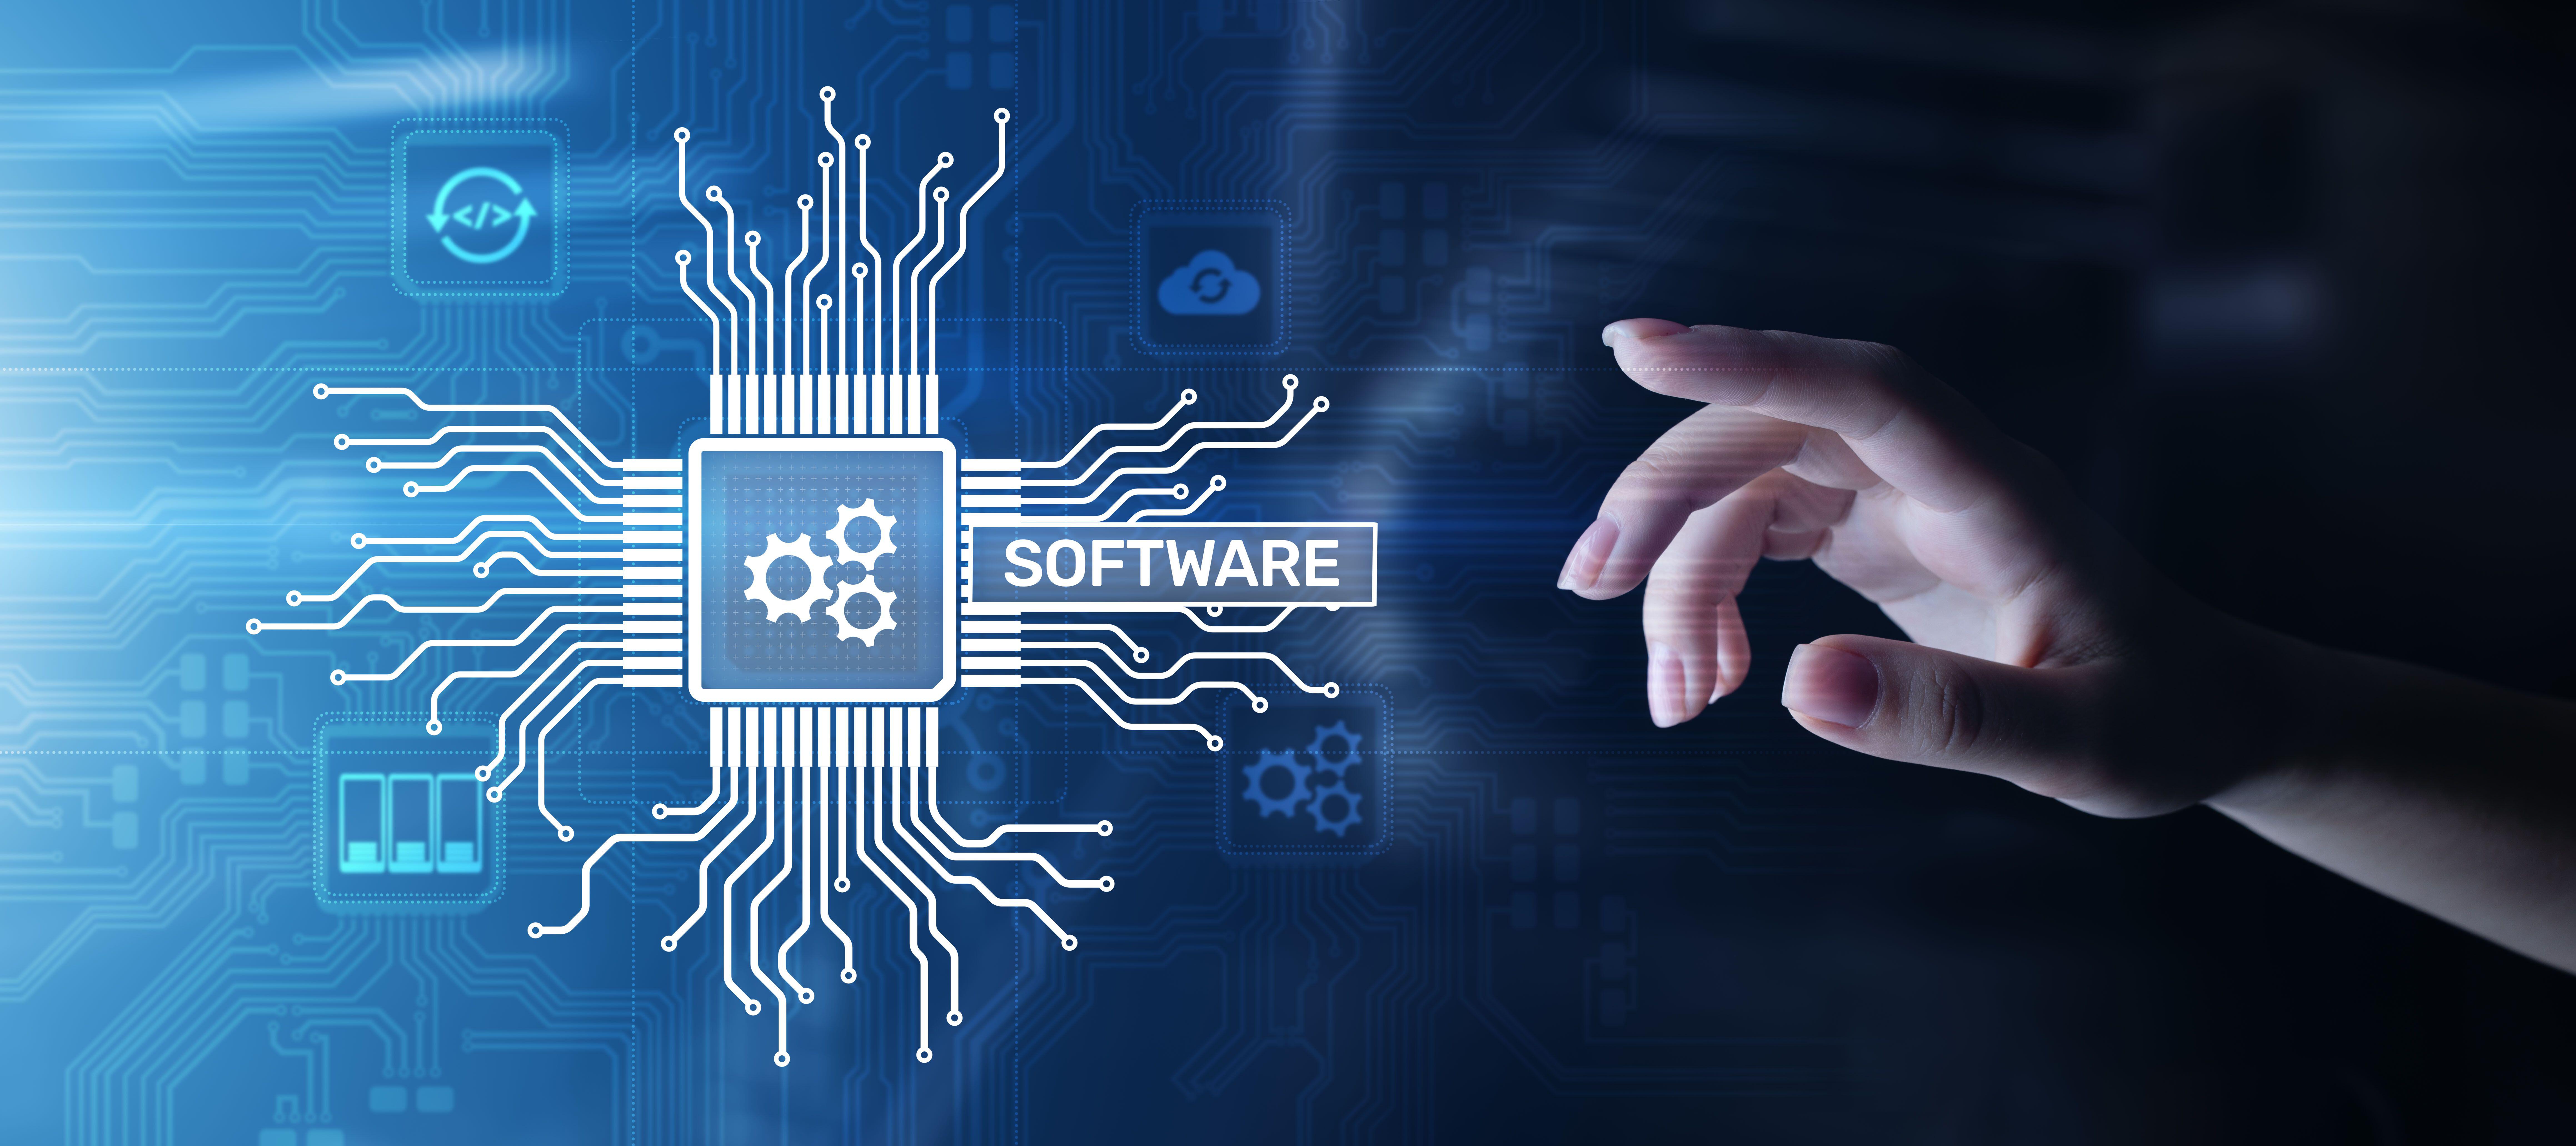 5 Software Development Trends to Watch in 2023 | ITPro Today: IT News, How-Tos, Trends, Case Studies, Career Tips, More